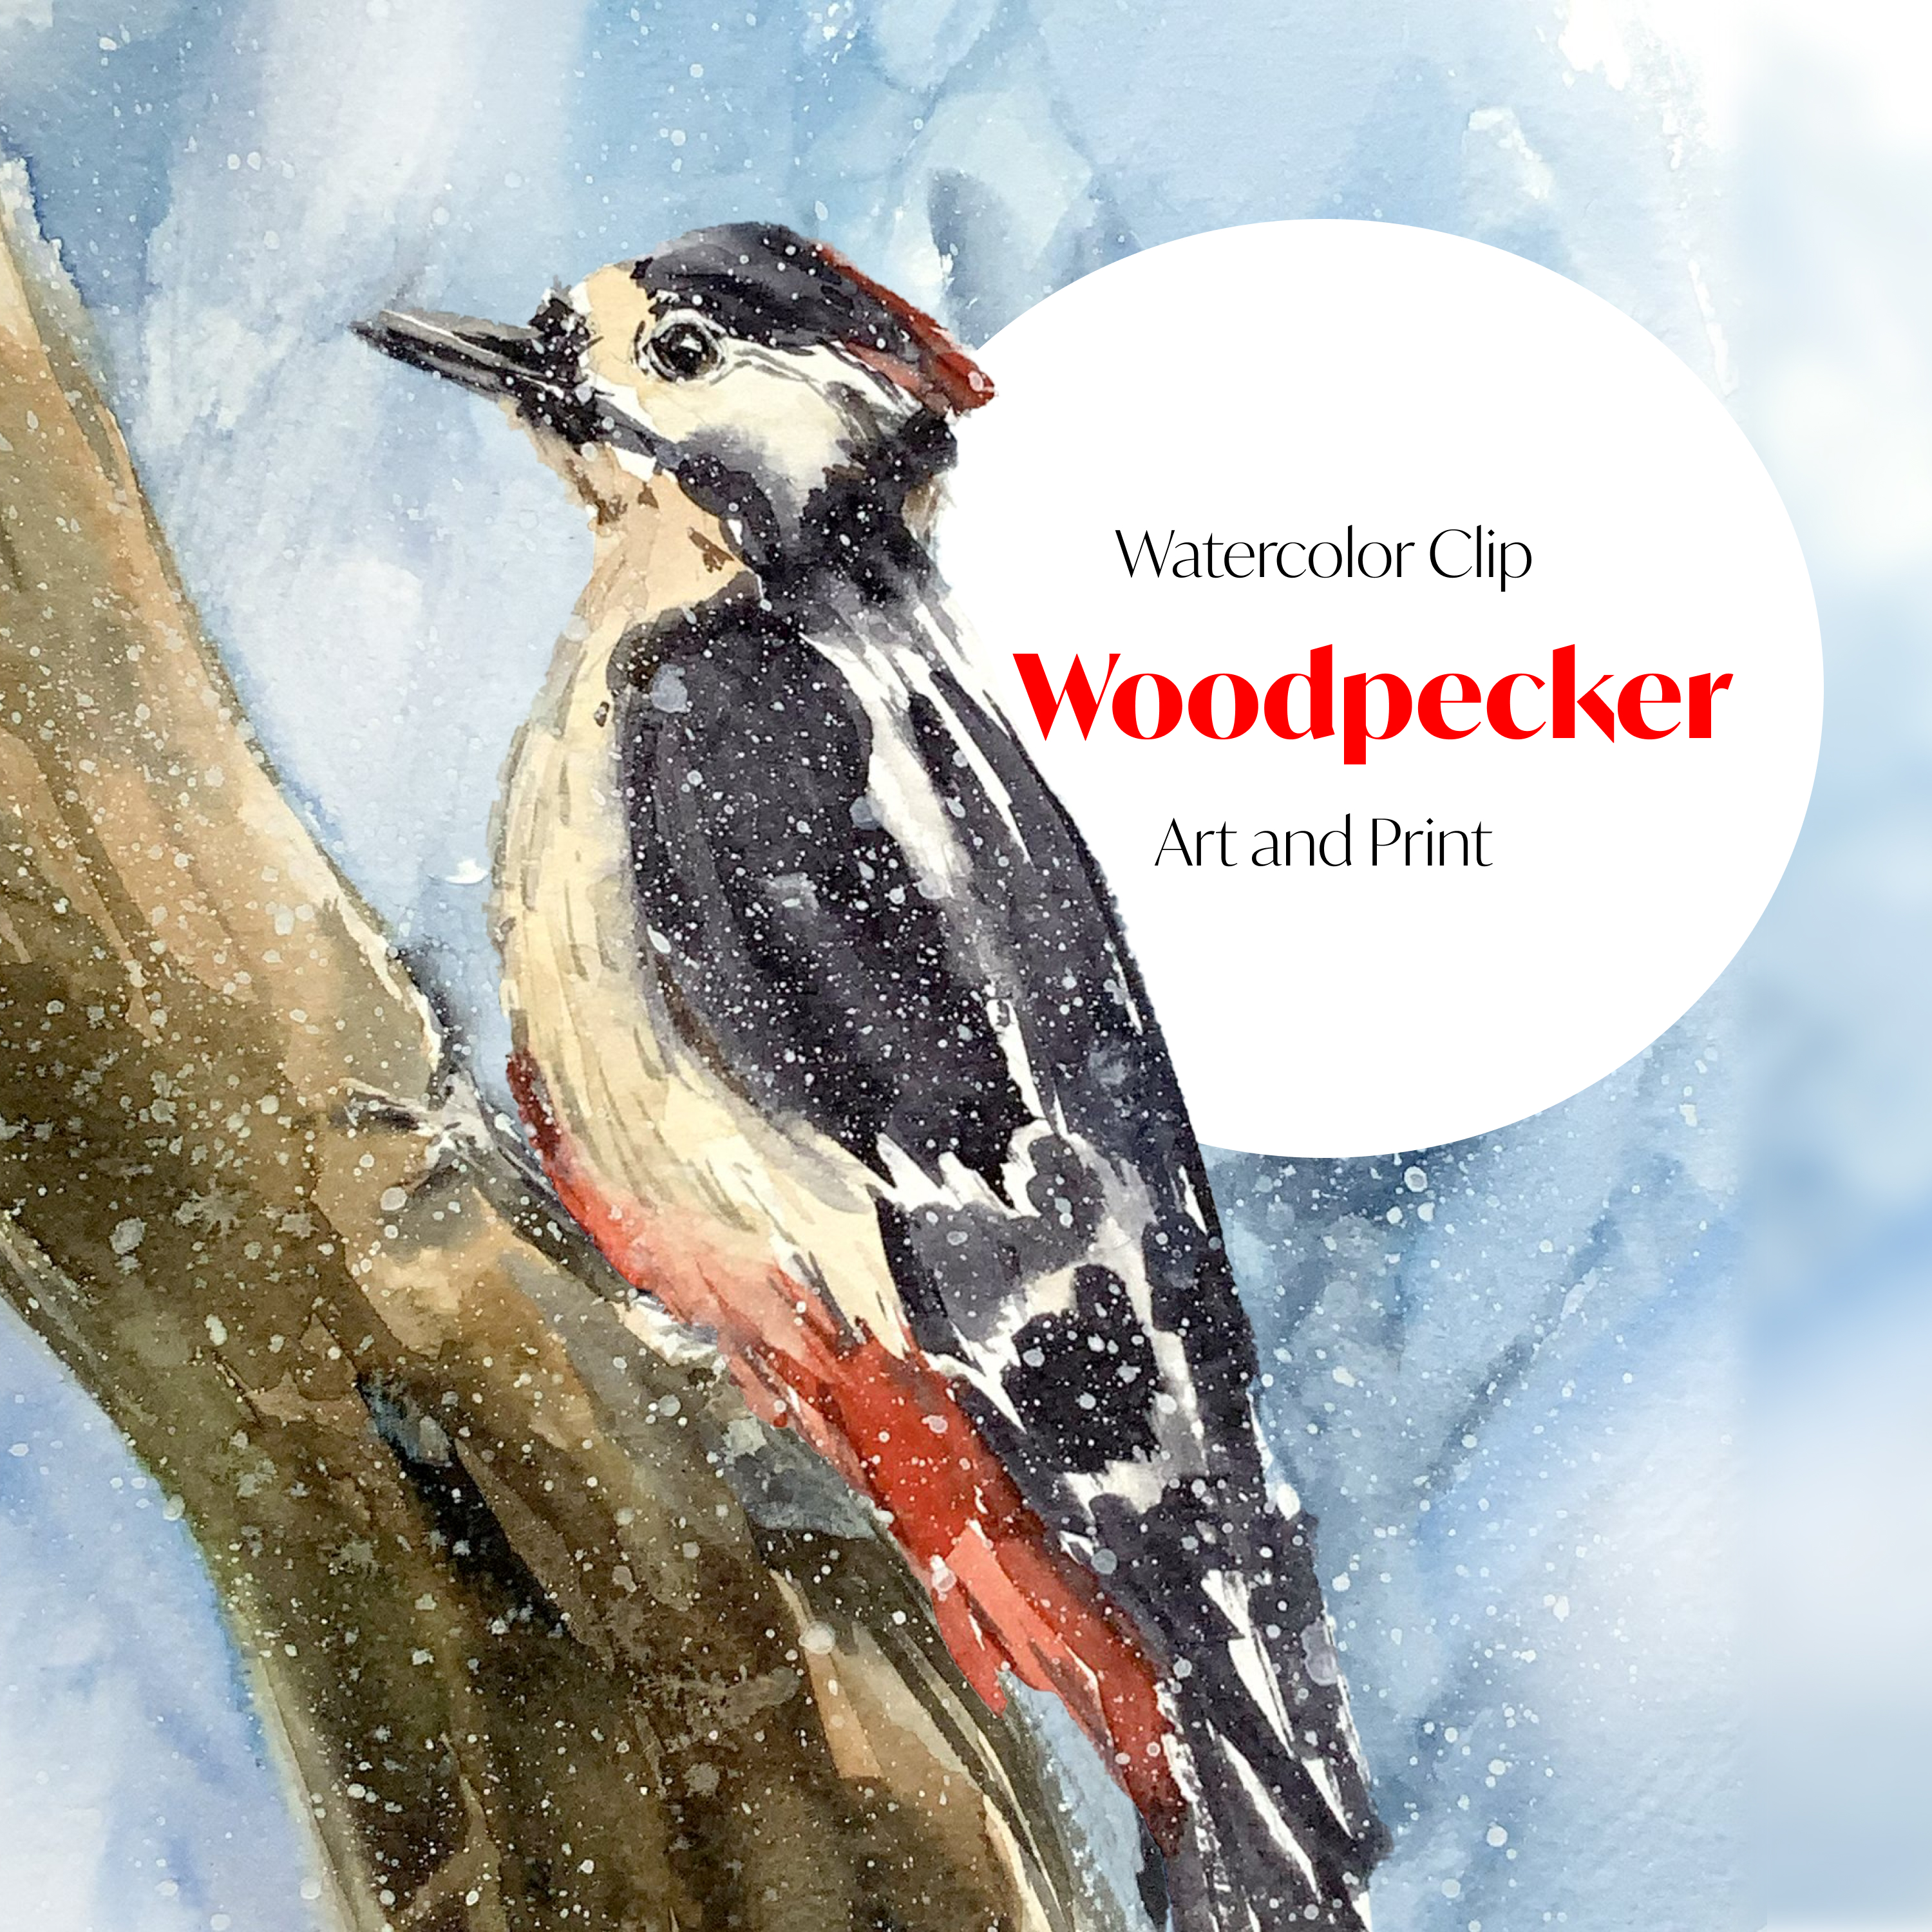 Preview of woodpeckers in the image with the inscription.